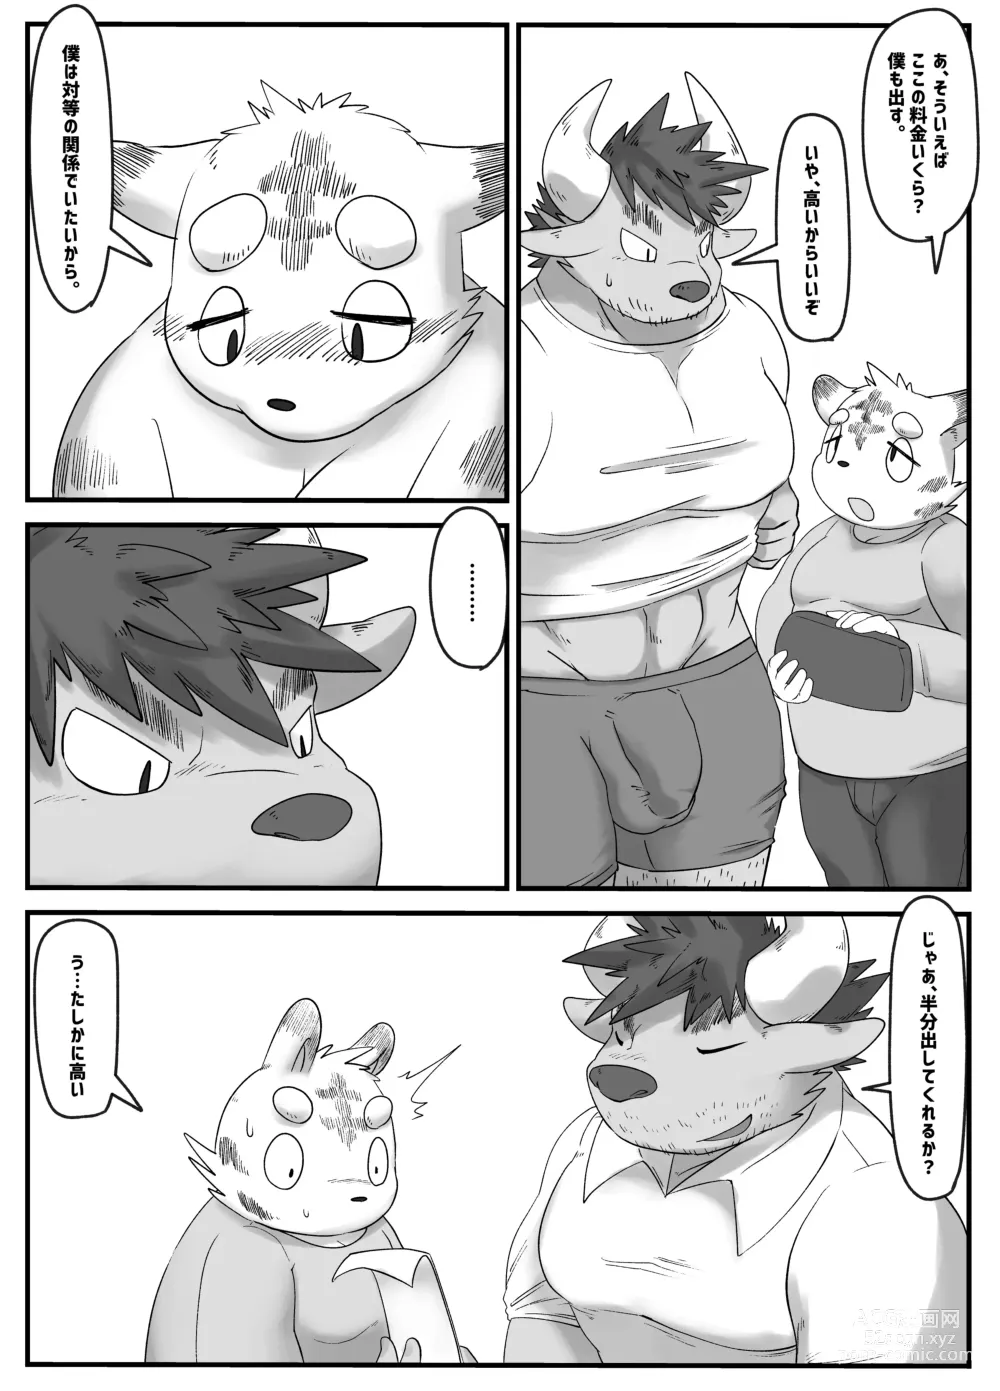 Page 30 of doujinshi Muscular Bull Teacher & Chubby Tiger Student 4